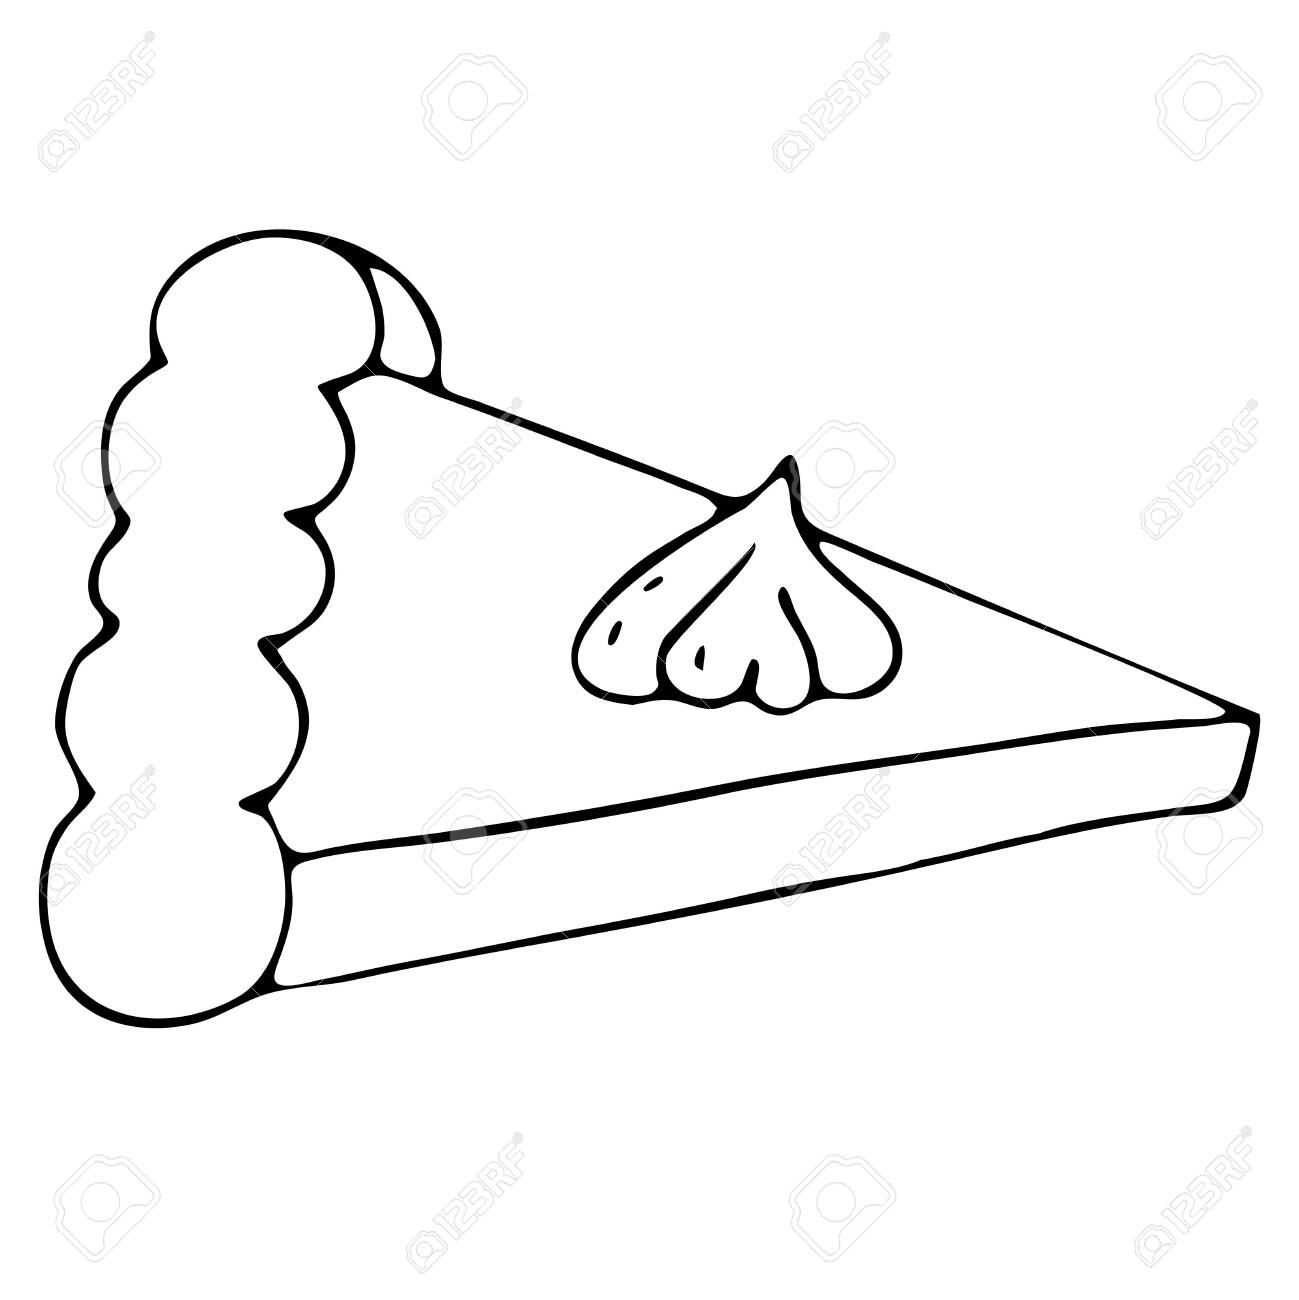 A slice of pumpkin pie freehand drawing vector element in doodle style coloring book black outline royalty free svg cliparts vectors and stock illustration image